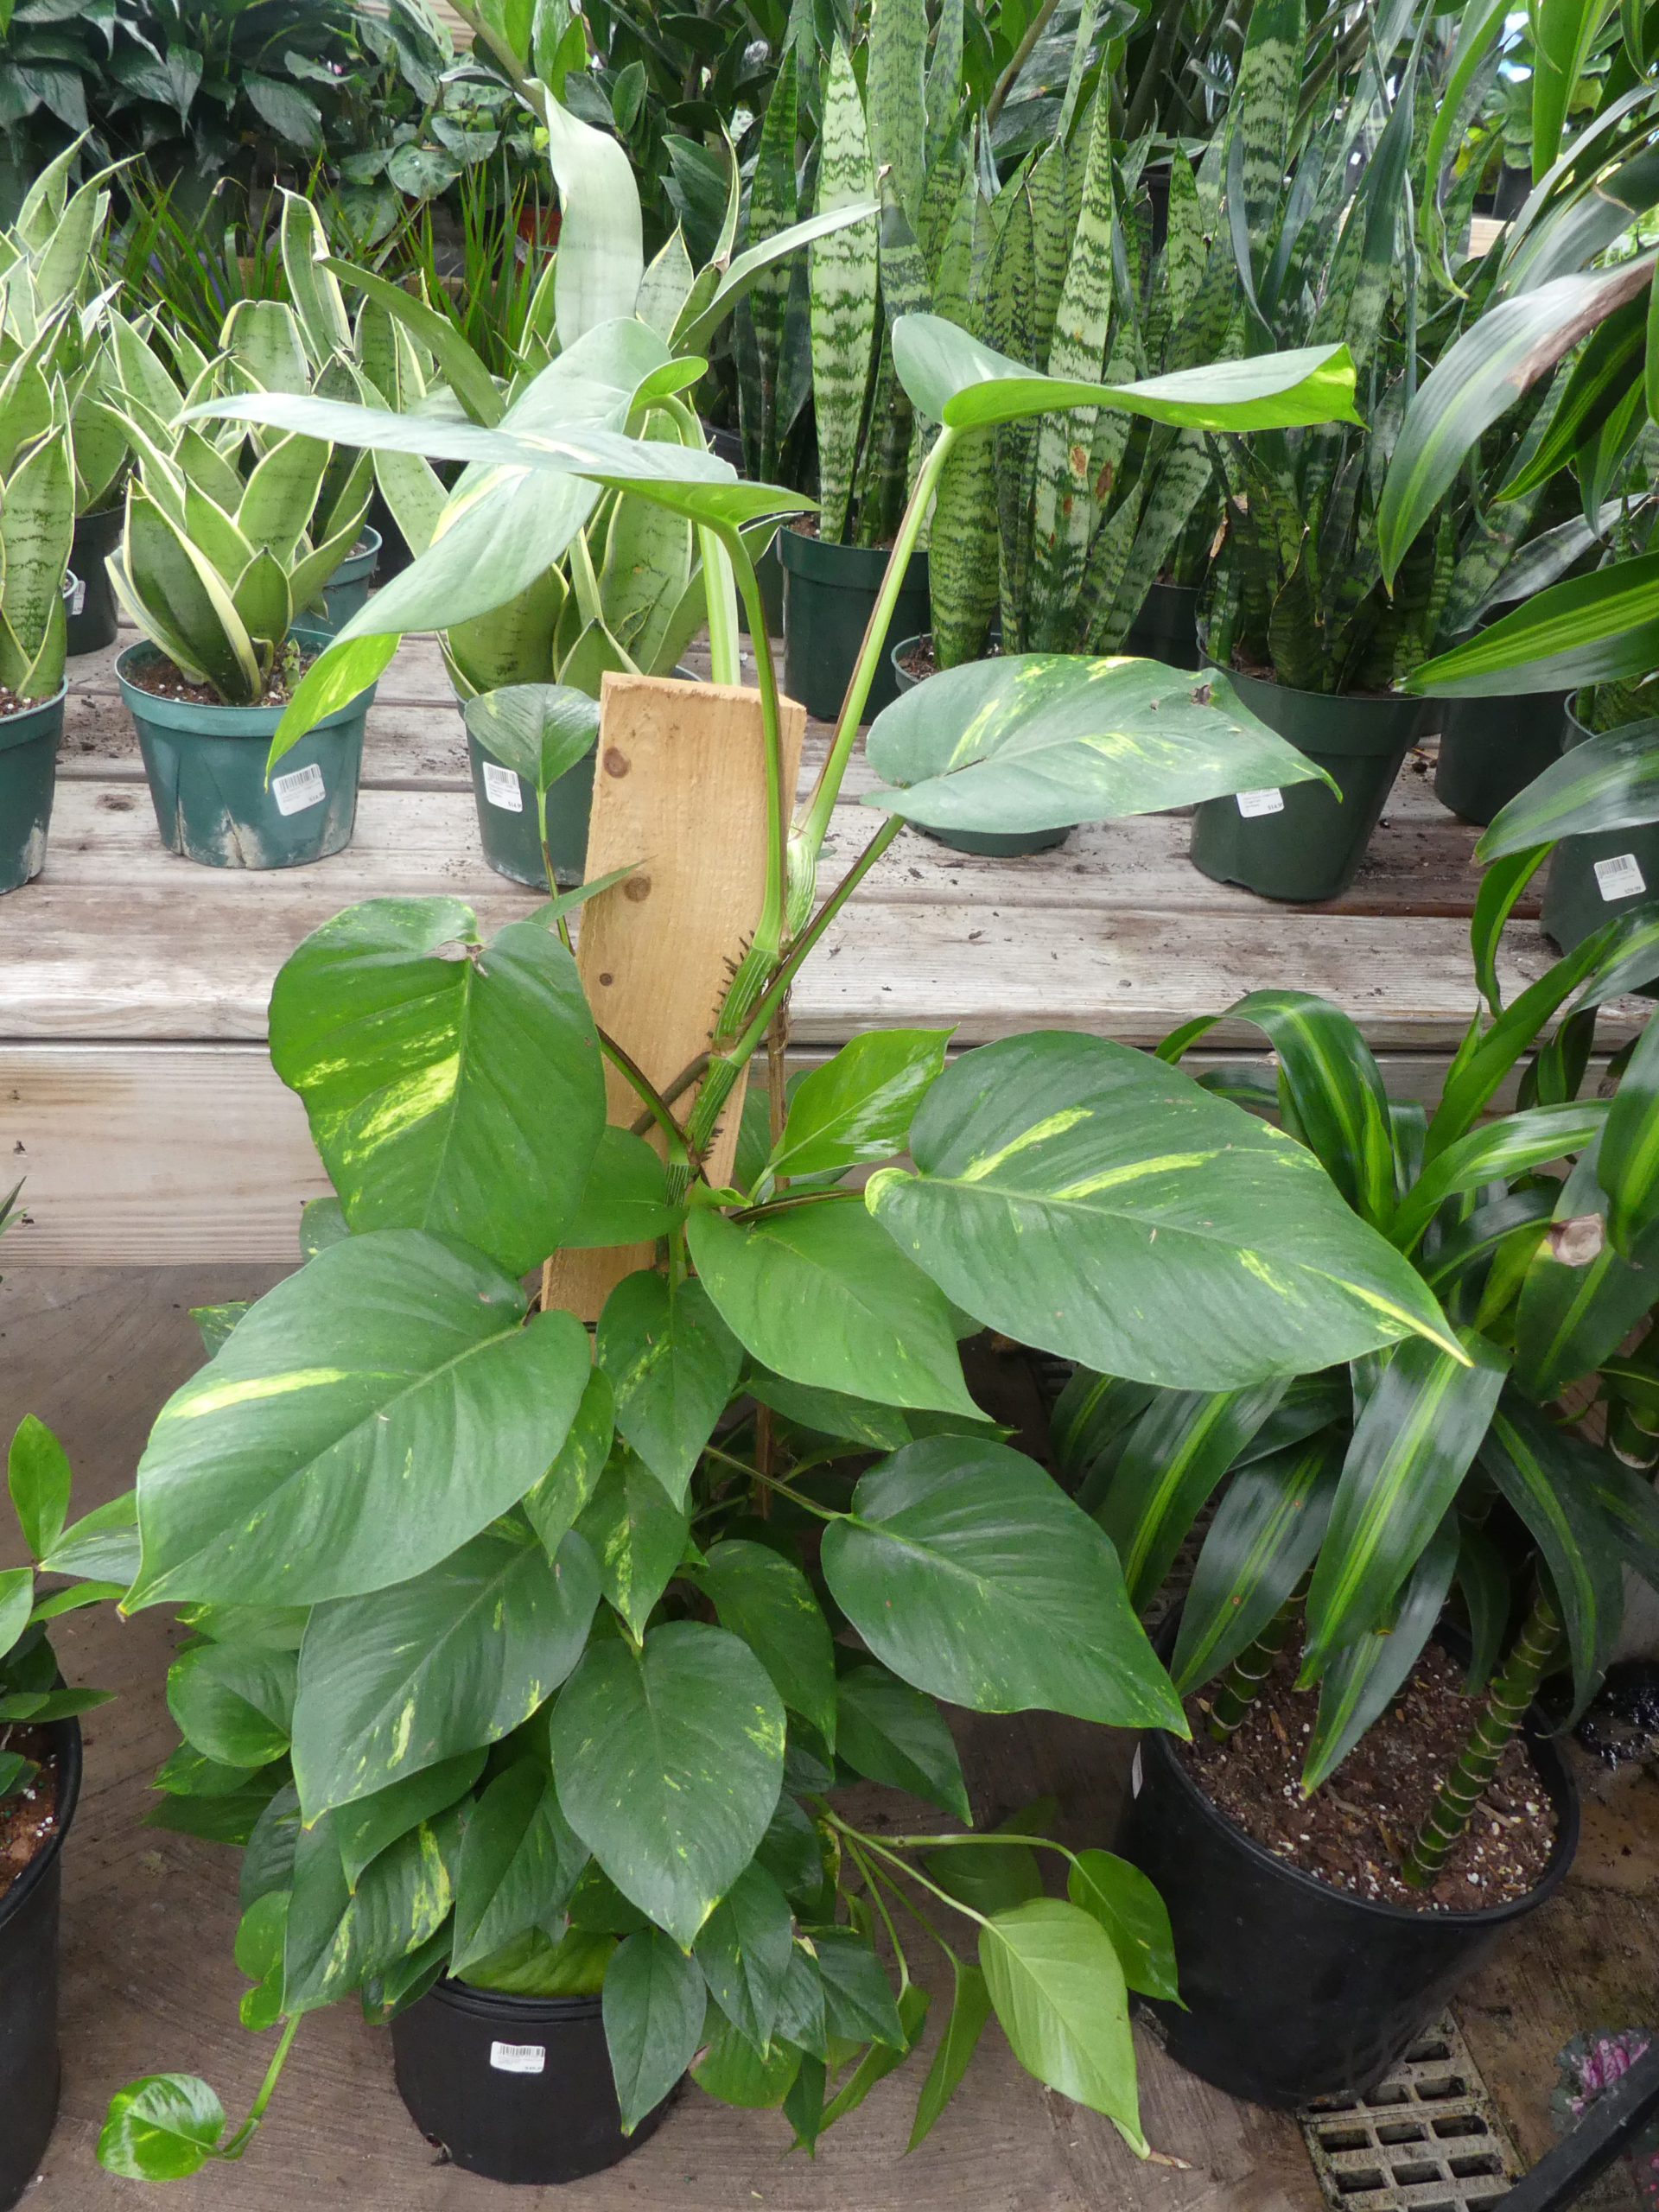 The golden pothos is a philodendron-like vine that grows in a basket or on a pole or bark post.  As houseplants the foliage rarely gets larger than 4 or 5 inches wide but in the wild the leaves can be several feet across. There is also a split-leaf variety. Good for low to medium light. ANDREW MESSINGER